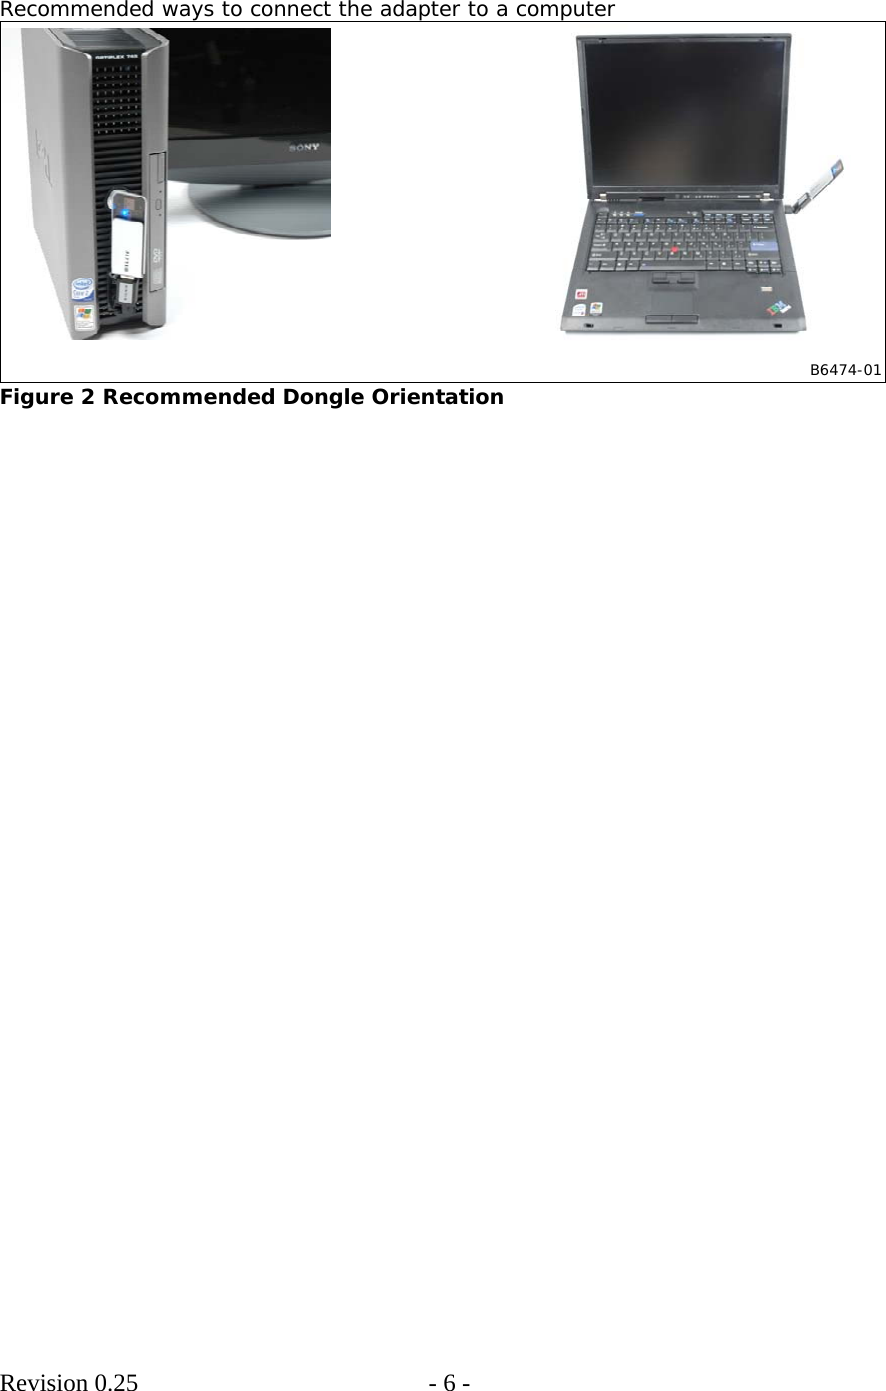        Revision 0.25  - 6 -      Recommended ways to connect the adapter to a computer B6474-01  Figure 2 Recommended Dongle Orientation